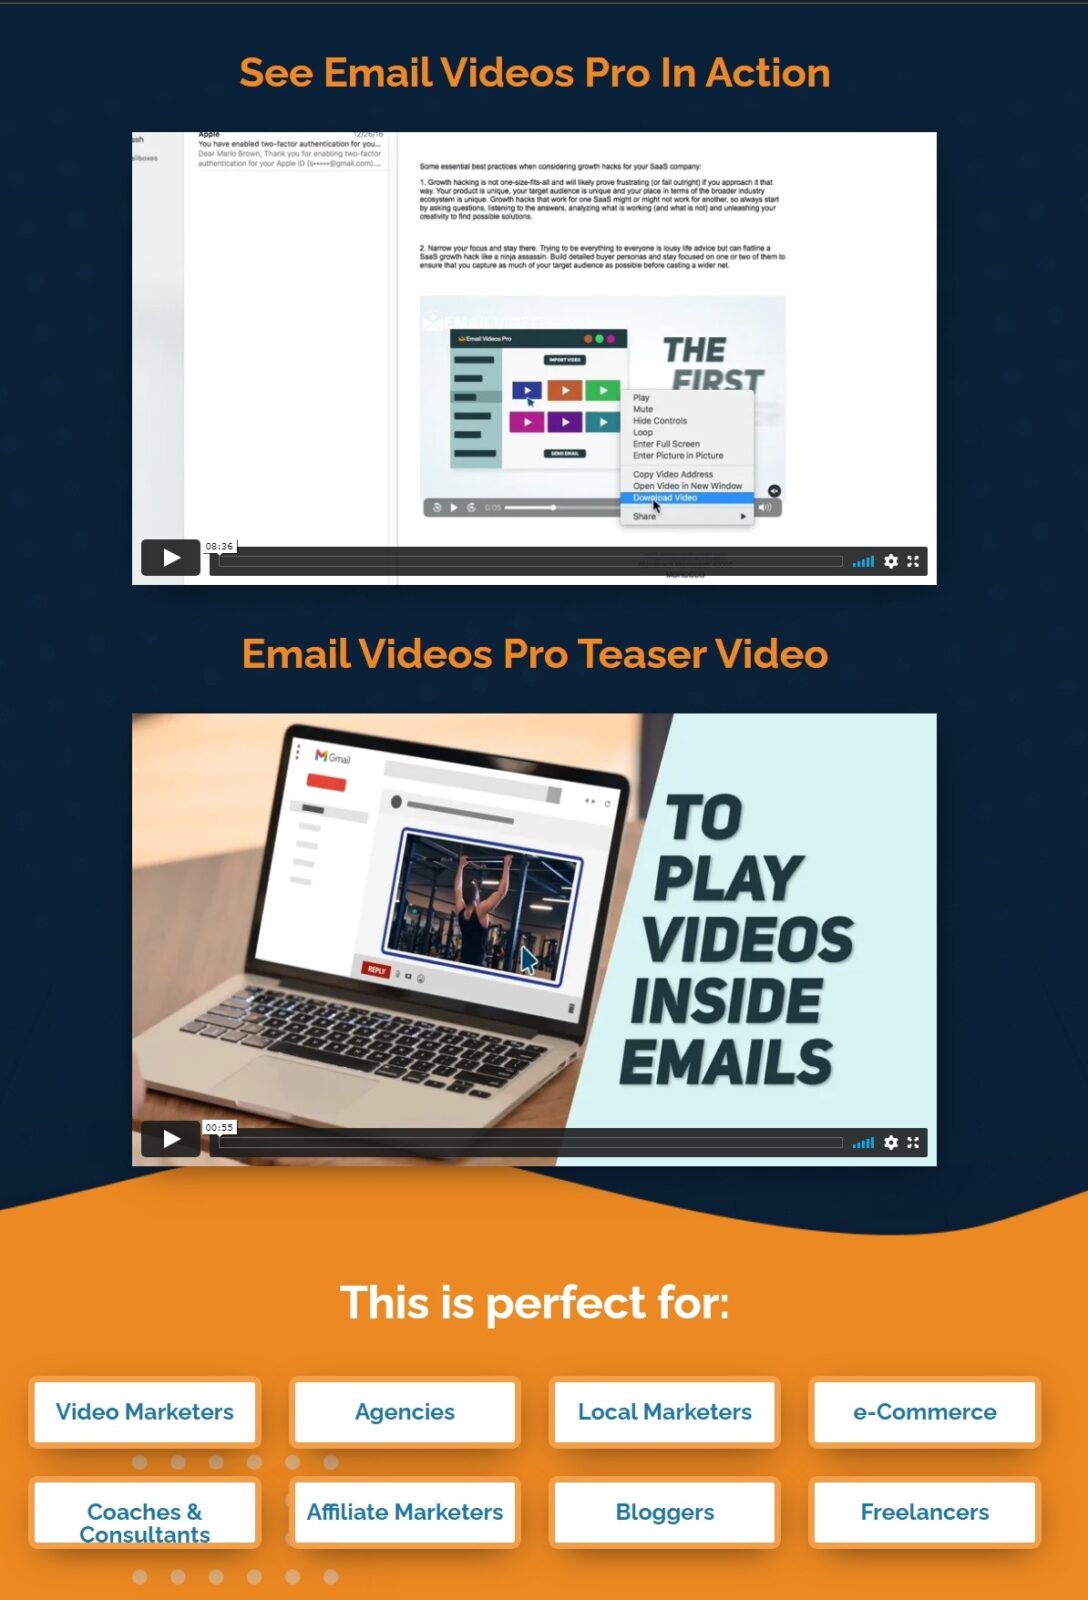 screenshot 2021.01.31 23 39 40 Video Email Marketing Software: You Can Now Add Full Blown Videos (NOT GIF) To your Emails For Maximum Engagement, Clicks, Traffic and Sales” #EmailMarketing #DigitalMarketing